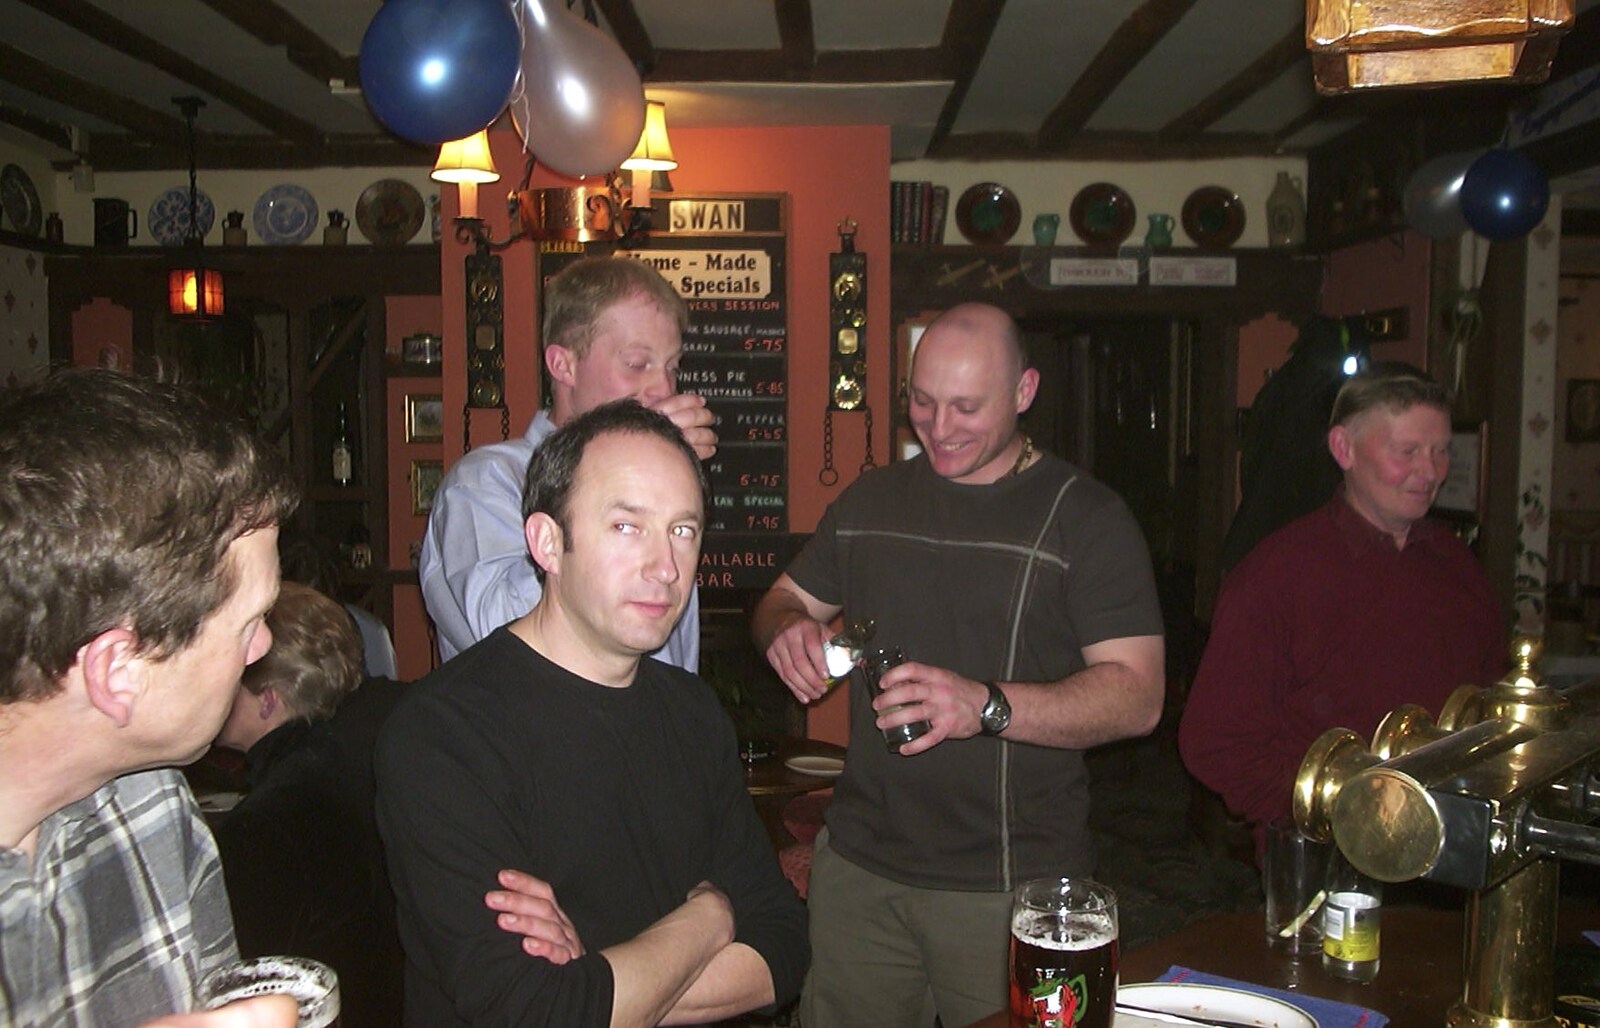 DH looks around warily from Paul and Claire's Engagement Party, Brome Swan, Suffolk - 27th March 2004